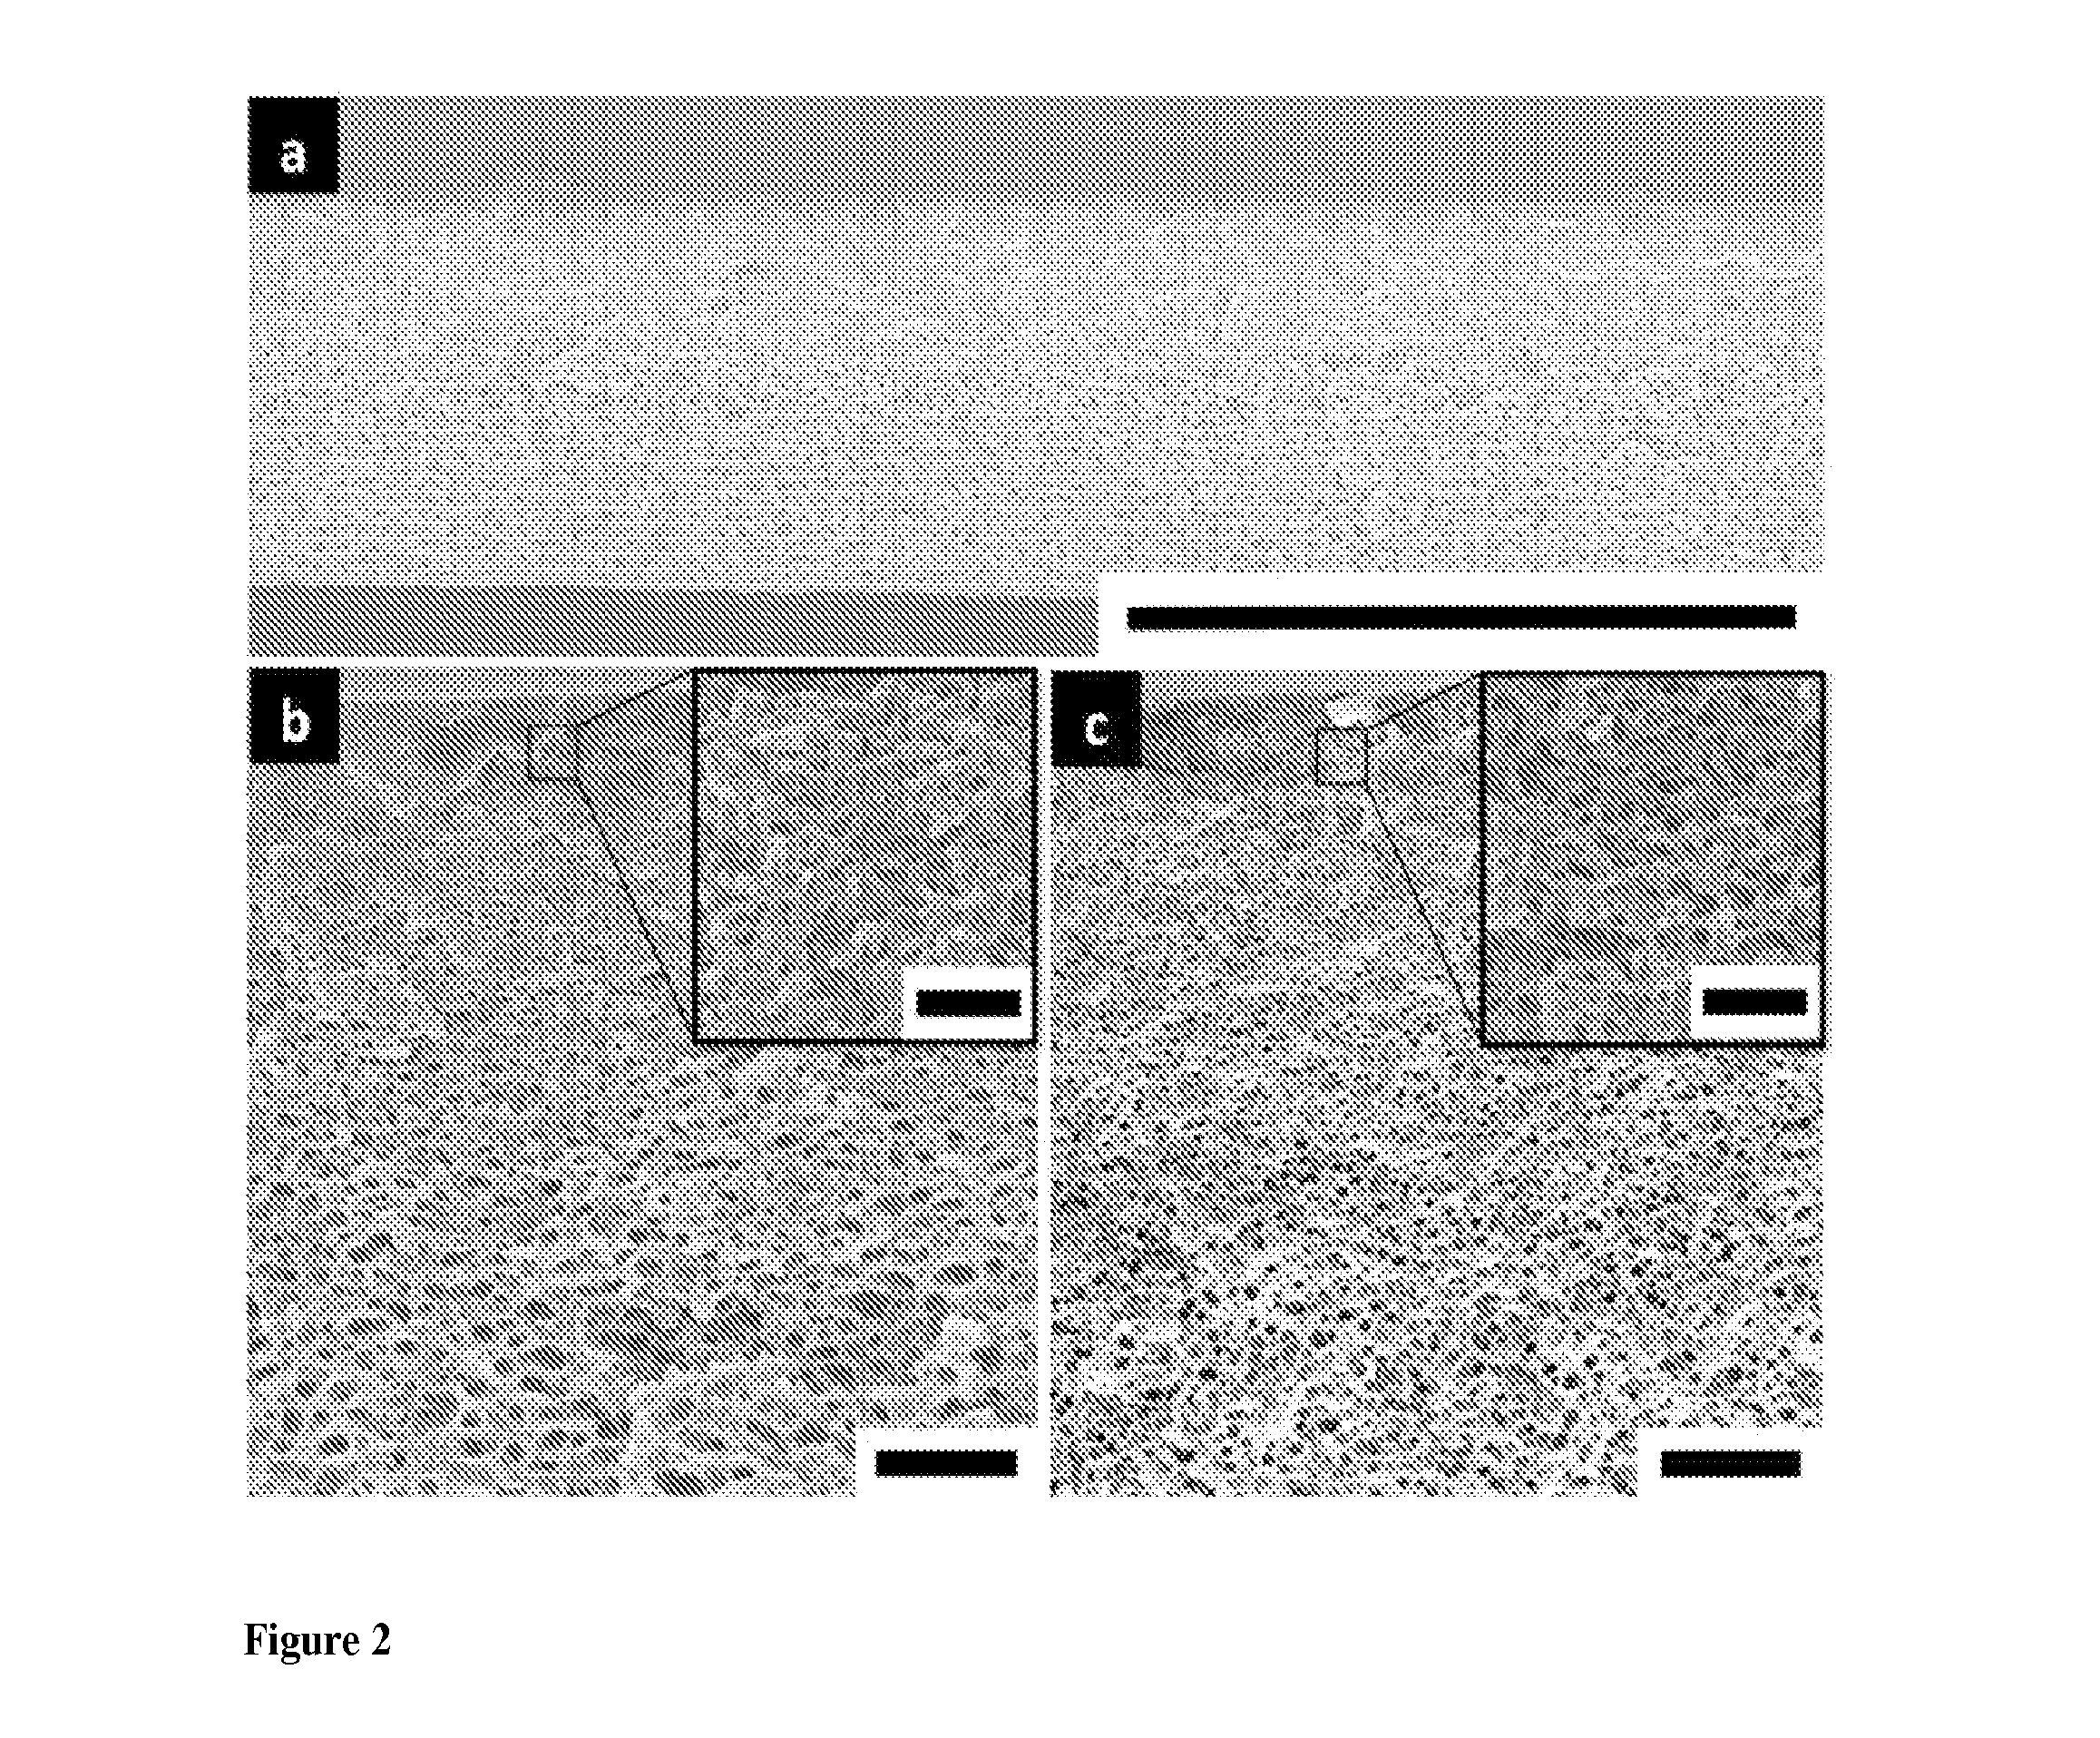 Multiblock copolymer films, methods of making same, and uses thereof